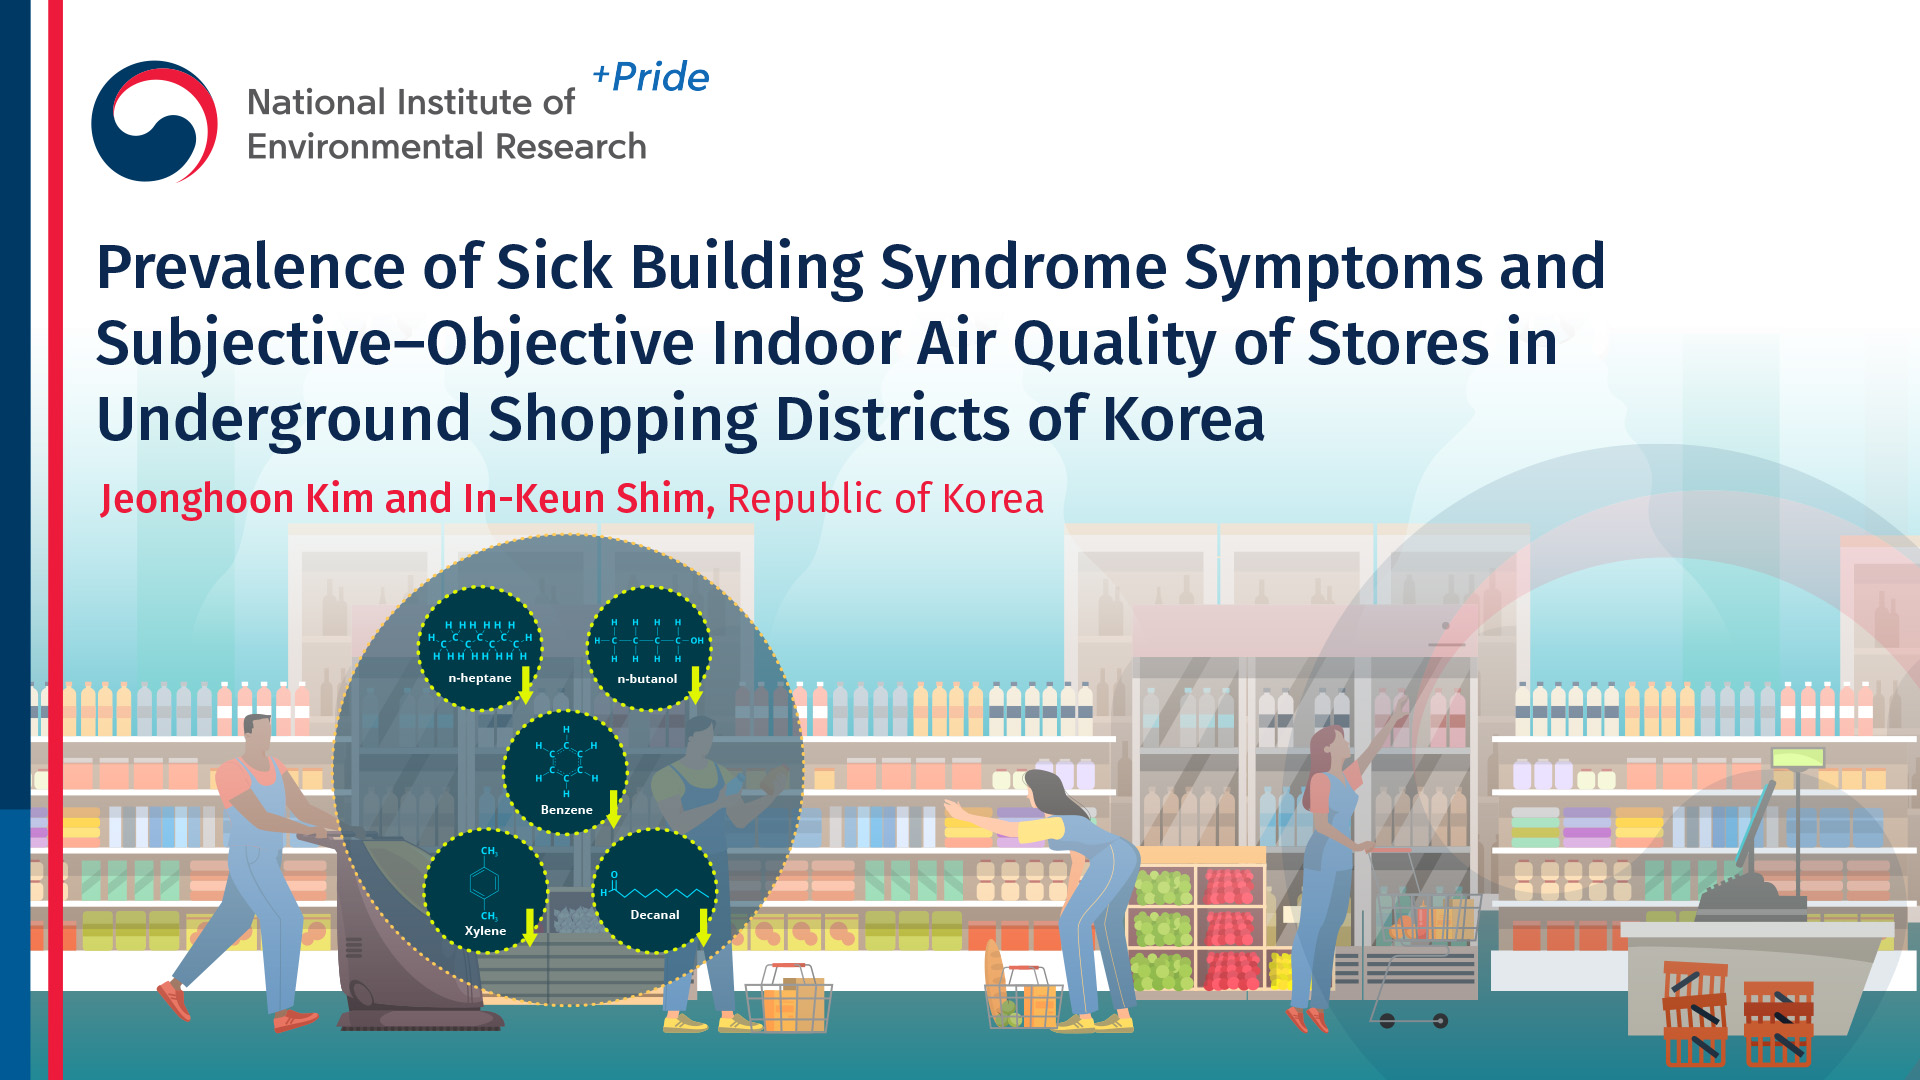 Prevalence of sick building syndrome symptoms and subject